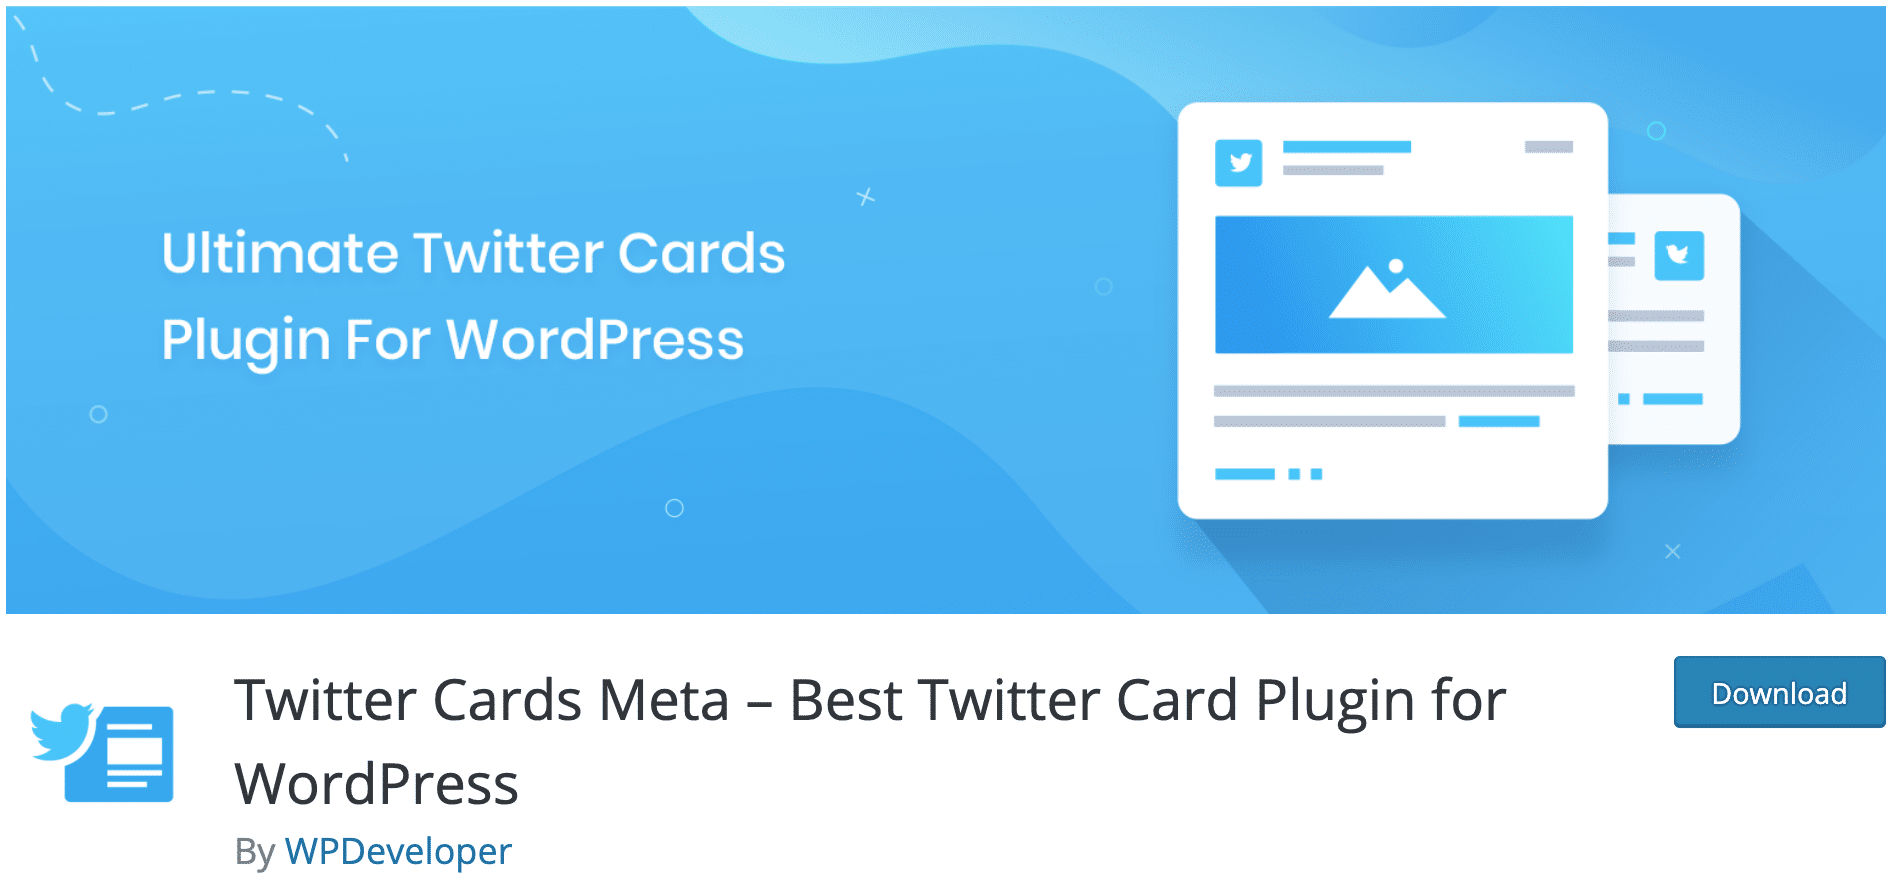 Twitter Cards Meta - Best Twitter Card Plugin for WordPress on the official repository.